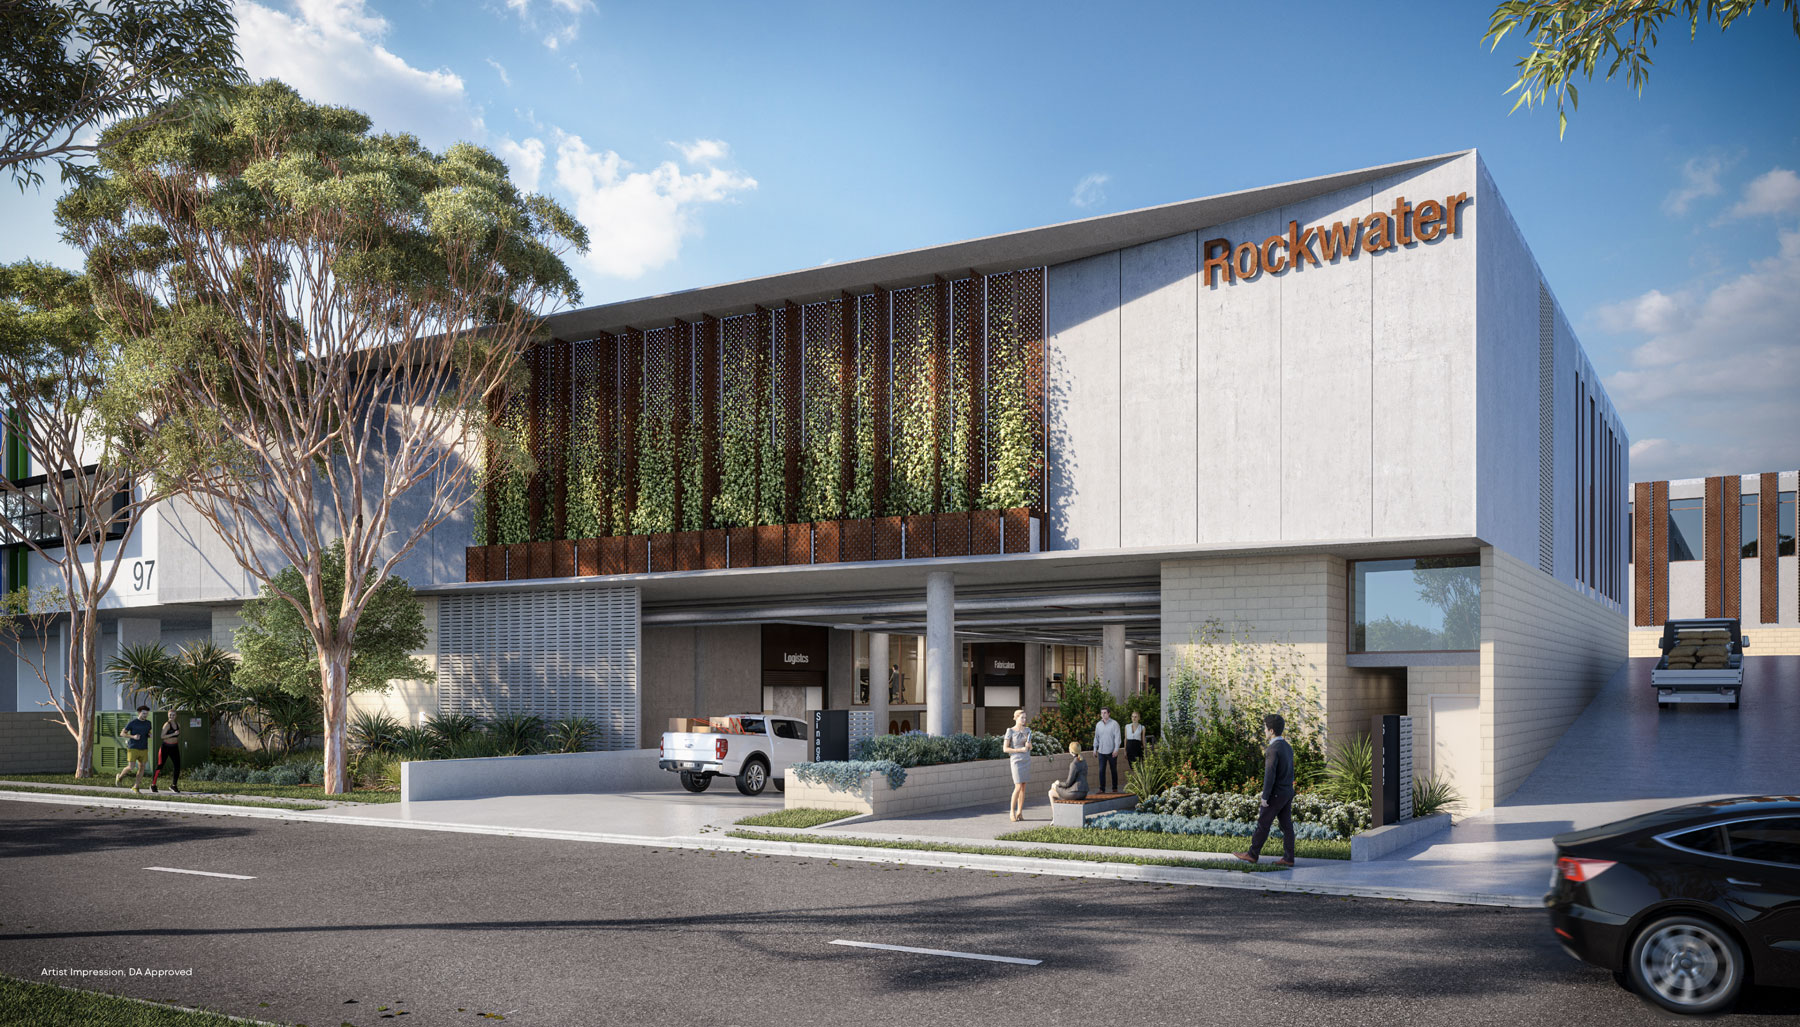 Rockwater Brookvale / DA Approved, Early Works Commenced